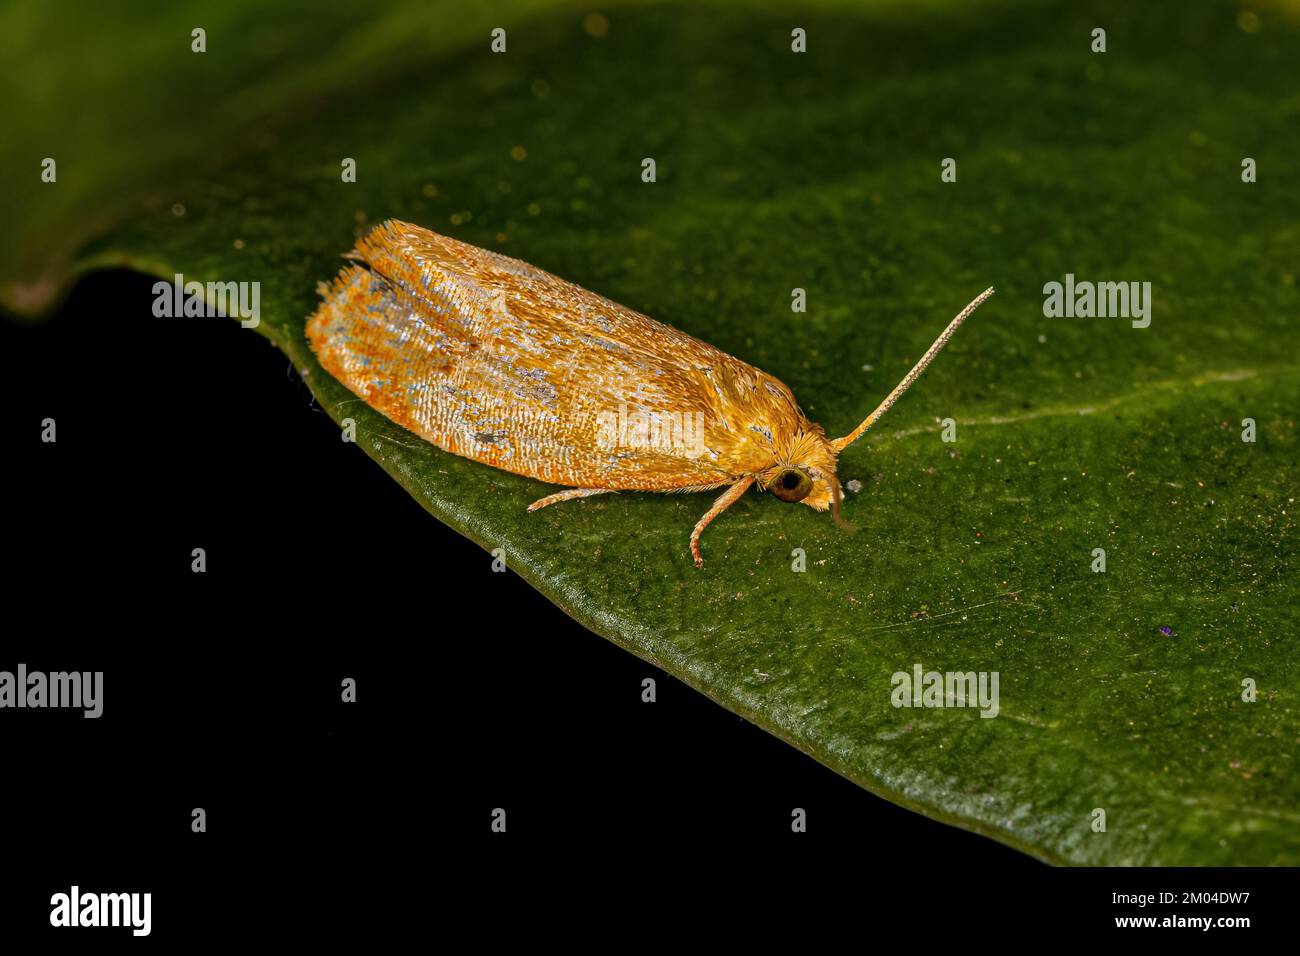 Adult Tortricine Leafroller Moth of the Family Tortricidae Stock Photo